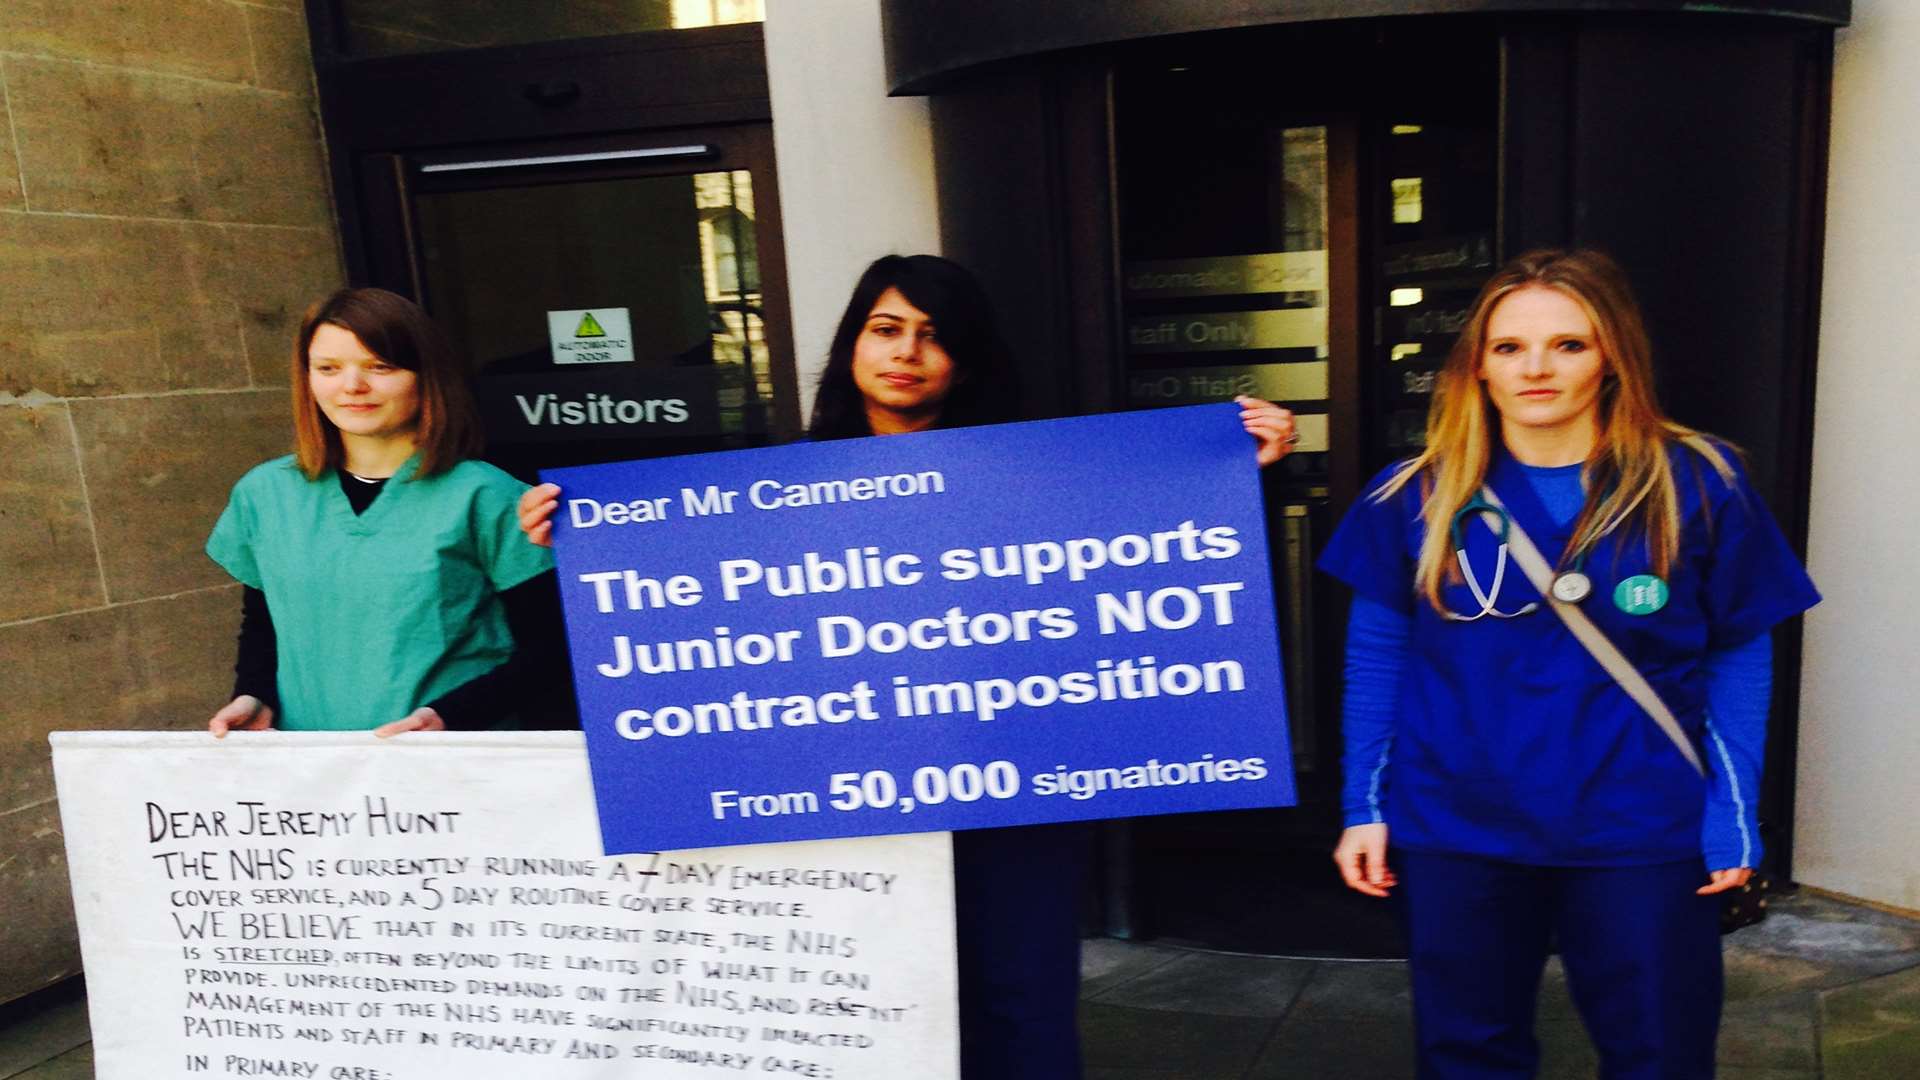 Ruth Wood delivered the petition alongside other junior doctors